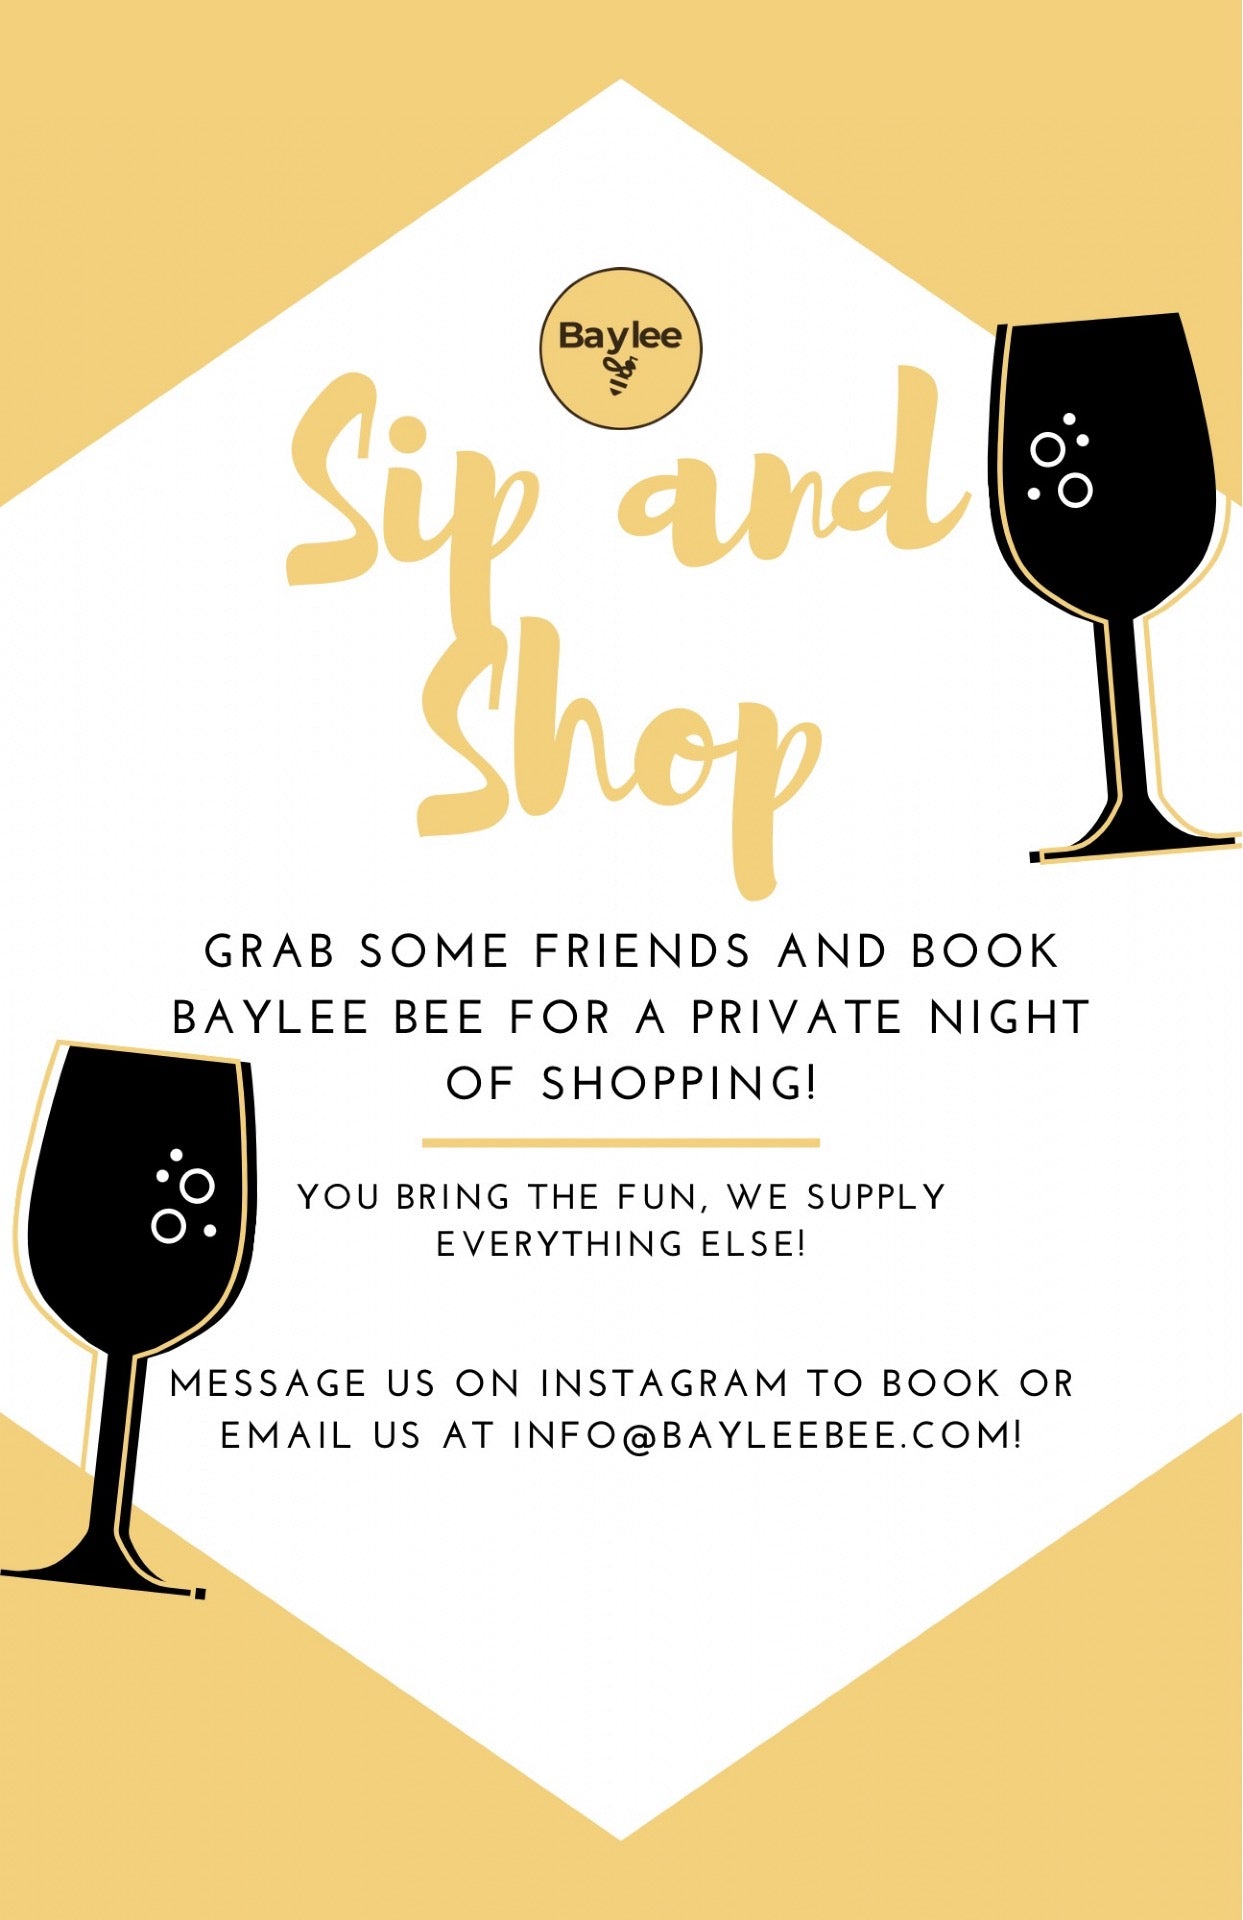 Sip and Shop!,